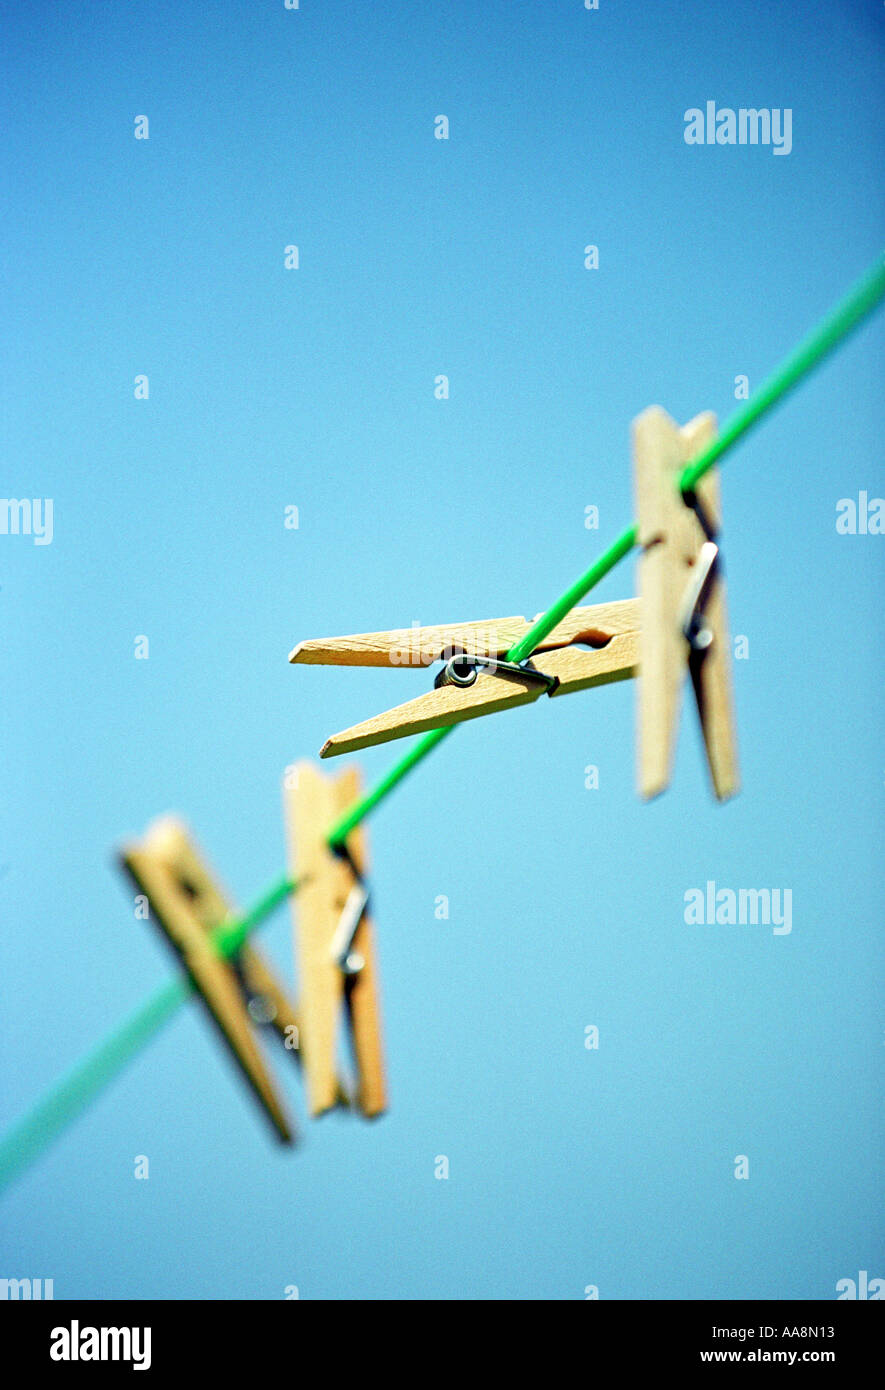 Clothes pegs on a washing line Stock Photo